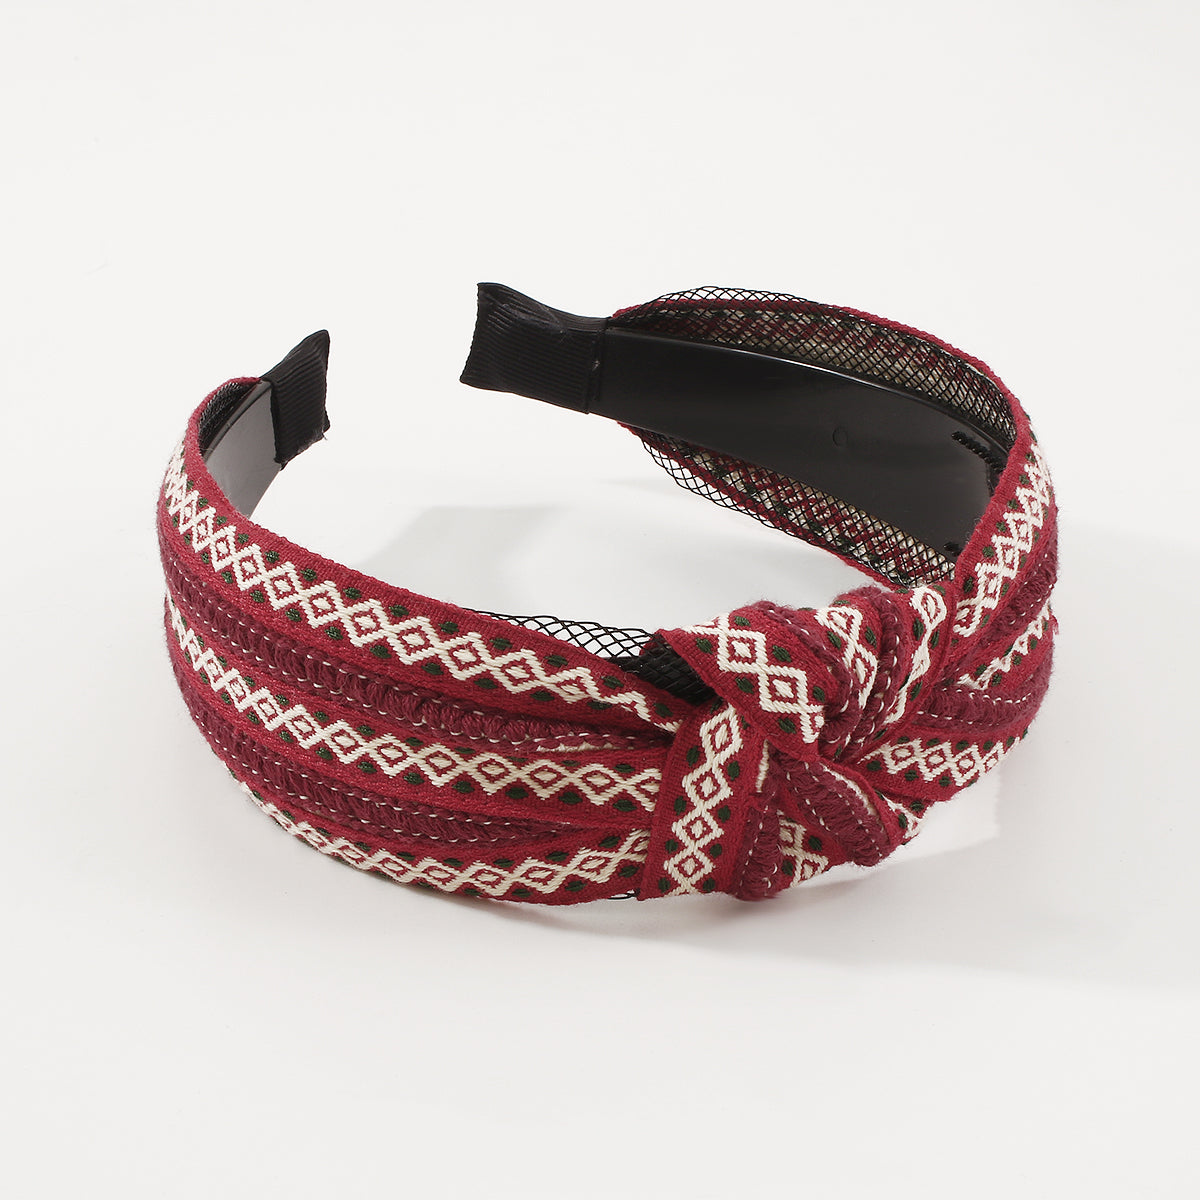 Ethnic Embroidery Knotted Wide-brimmed Hairband medyjewelry